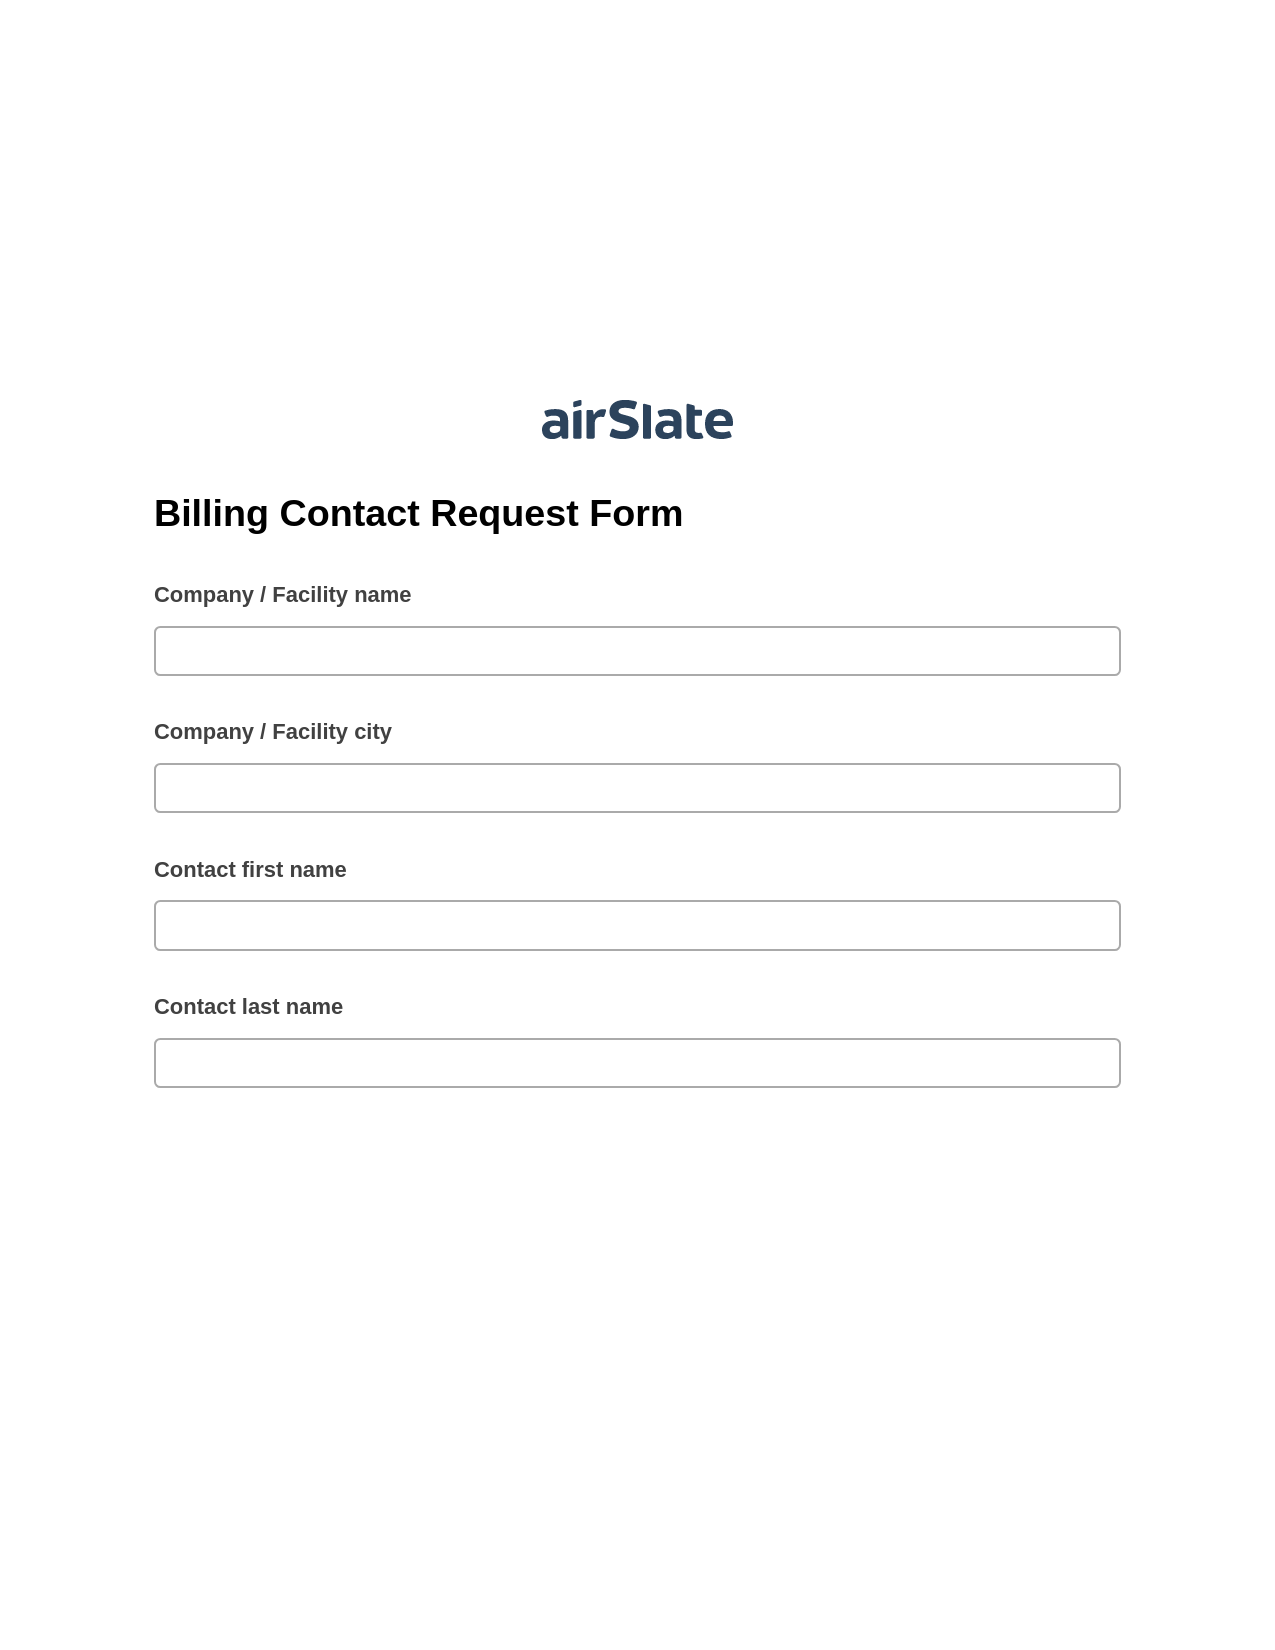 Multirole Billing Contact Request Form Pre-fill Slate from MS Dynamics 365 Records Bot, Audit Trail Bot, Box Bot